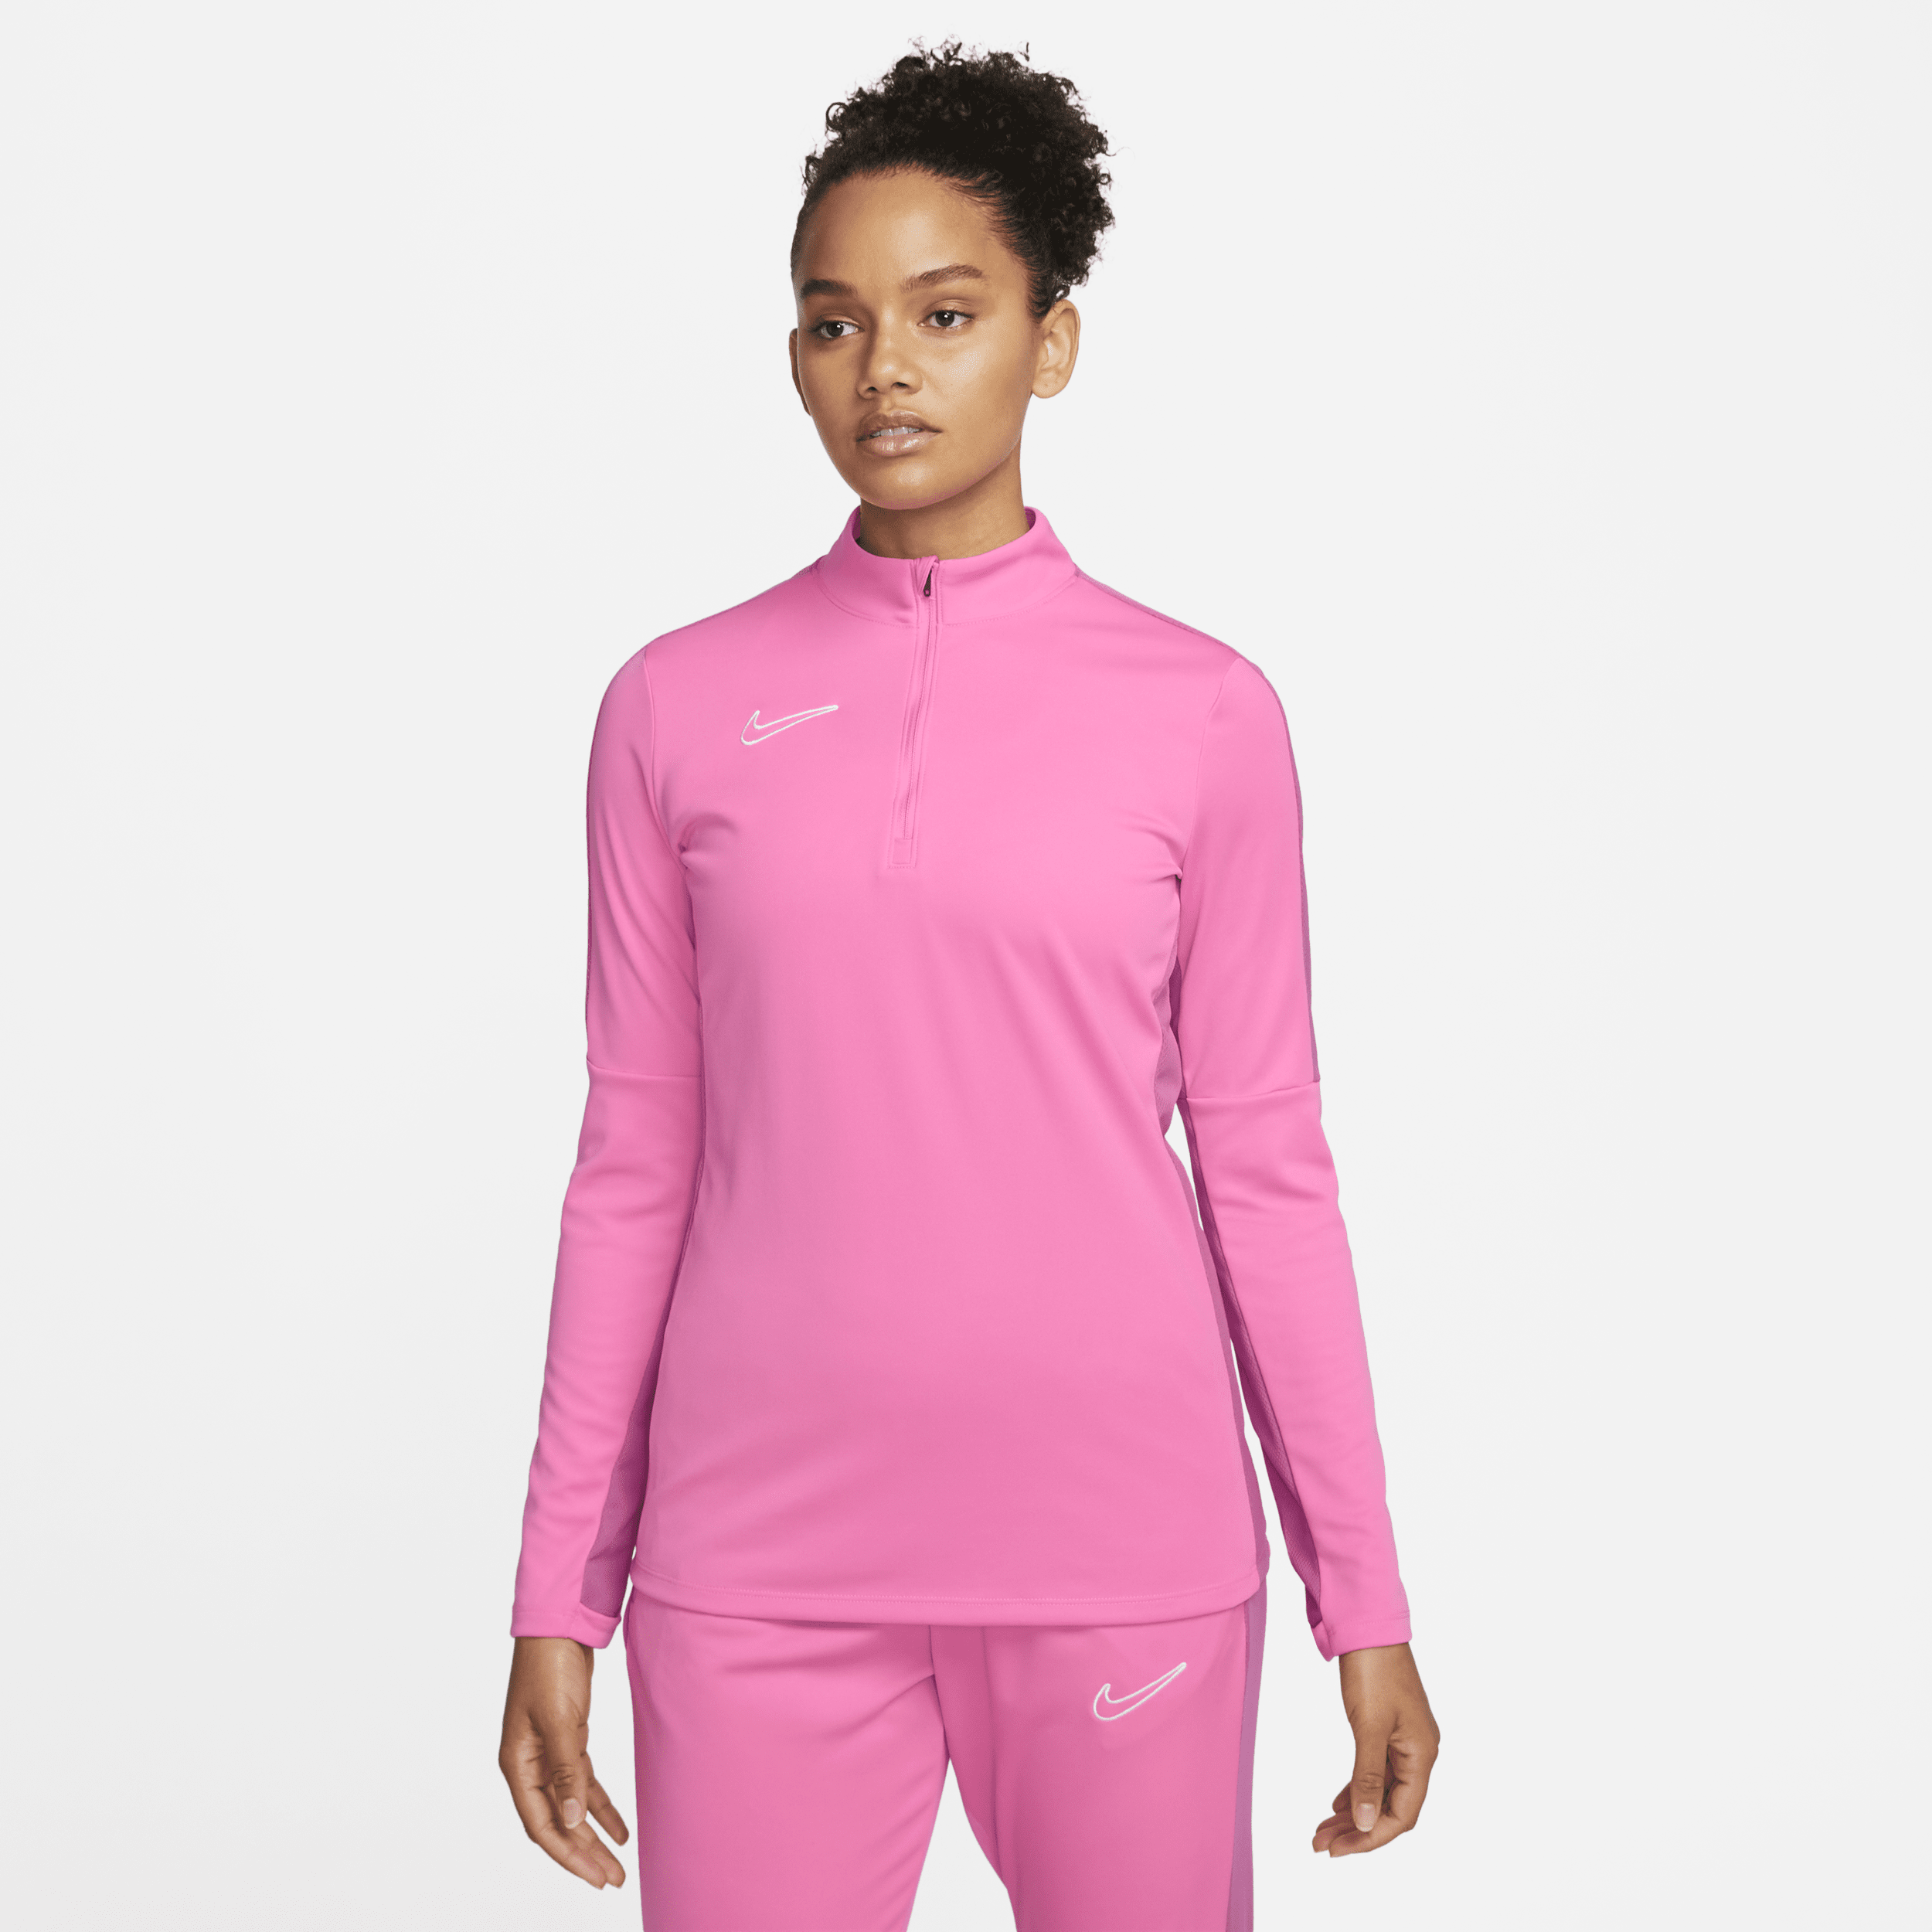 Nike Women's Dri-fit Academy Soccer Drill Top In Pink